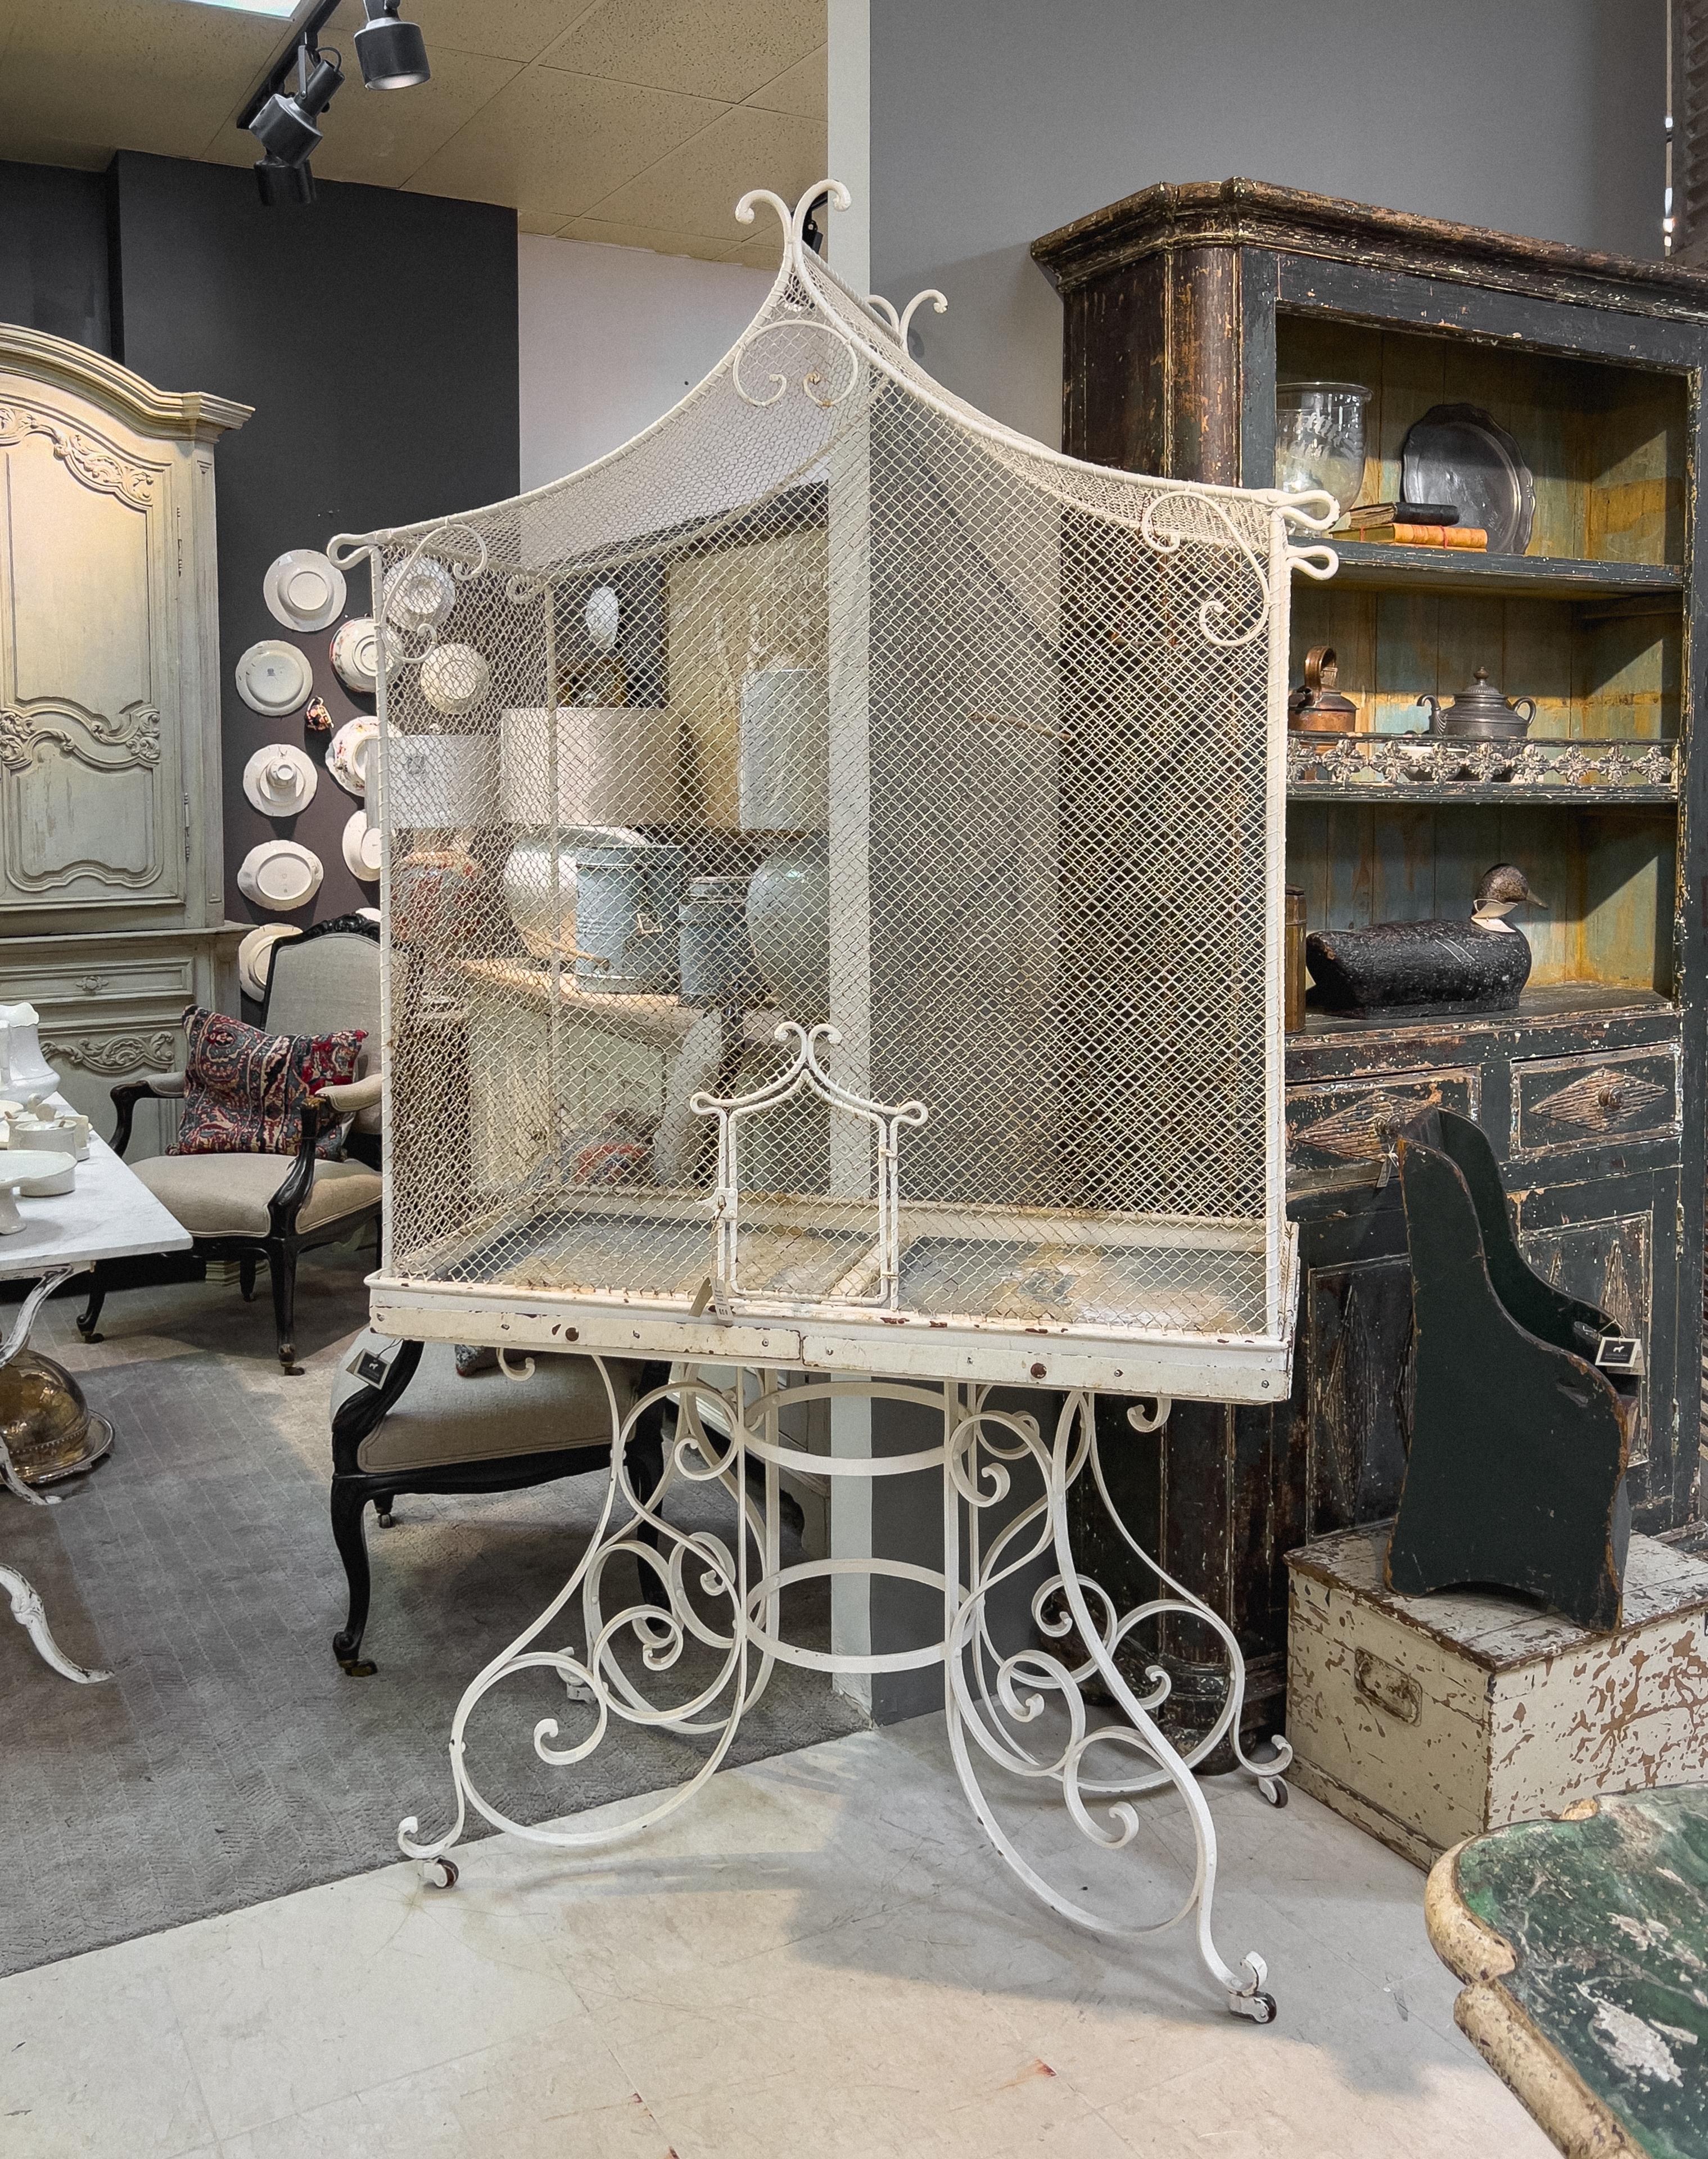 19th century French bird cage is nearly 7 feet tall, free standing bird house, stands on four intricate iron scroll legs connected with a double circular stretcher, and ending with rolling coasters. The wired bird habitat has a rectangular body and